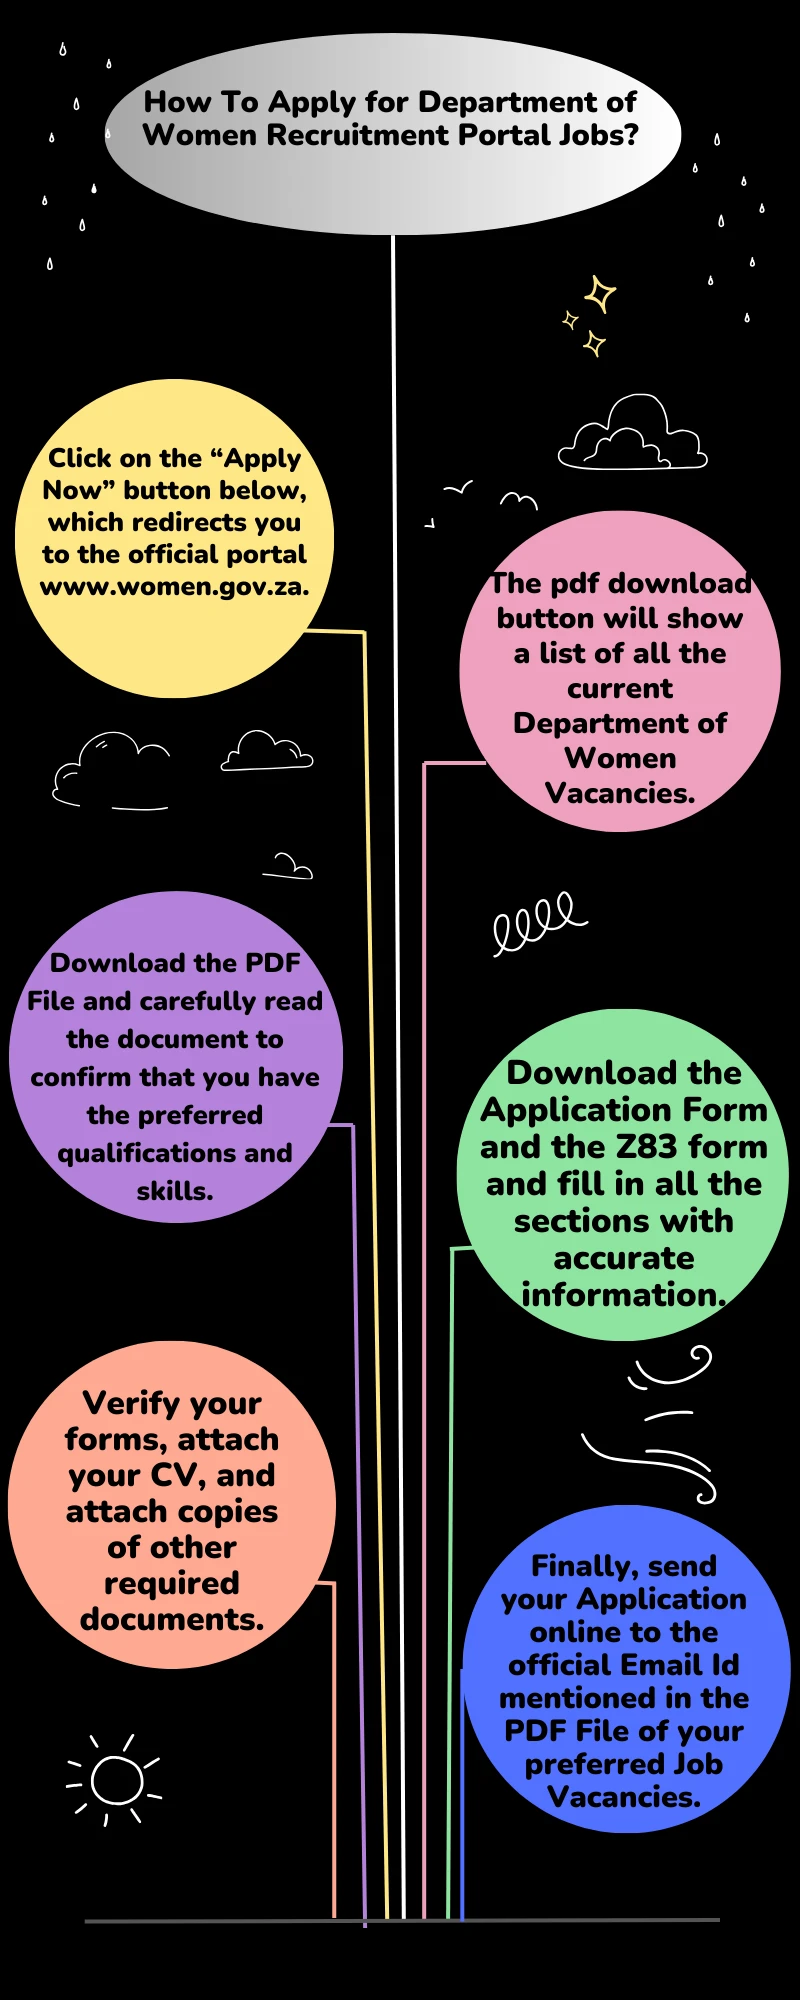 How To Apply for Department of Women Recruitment Portal Jobs?